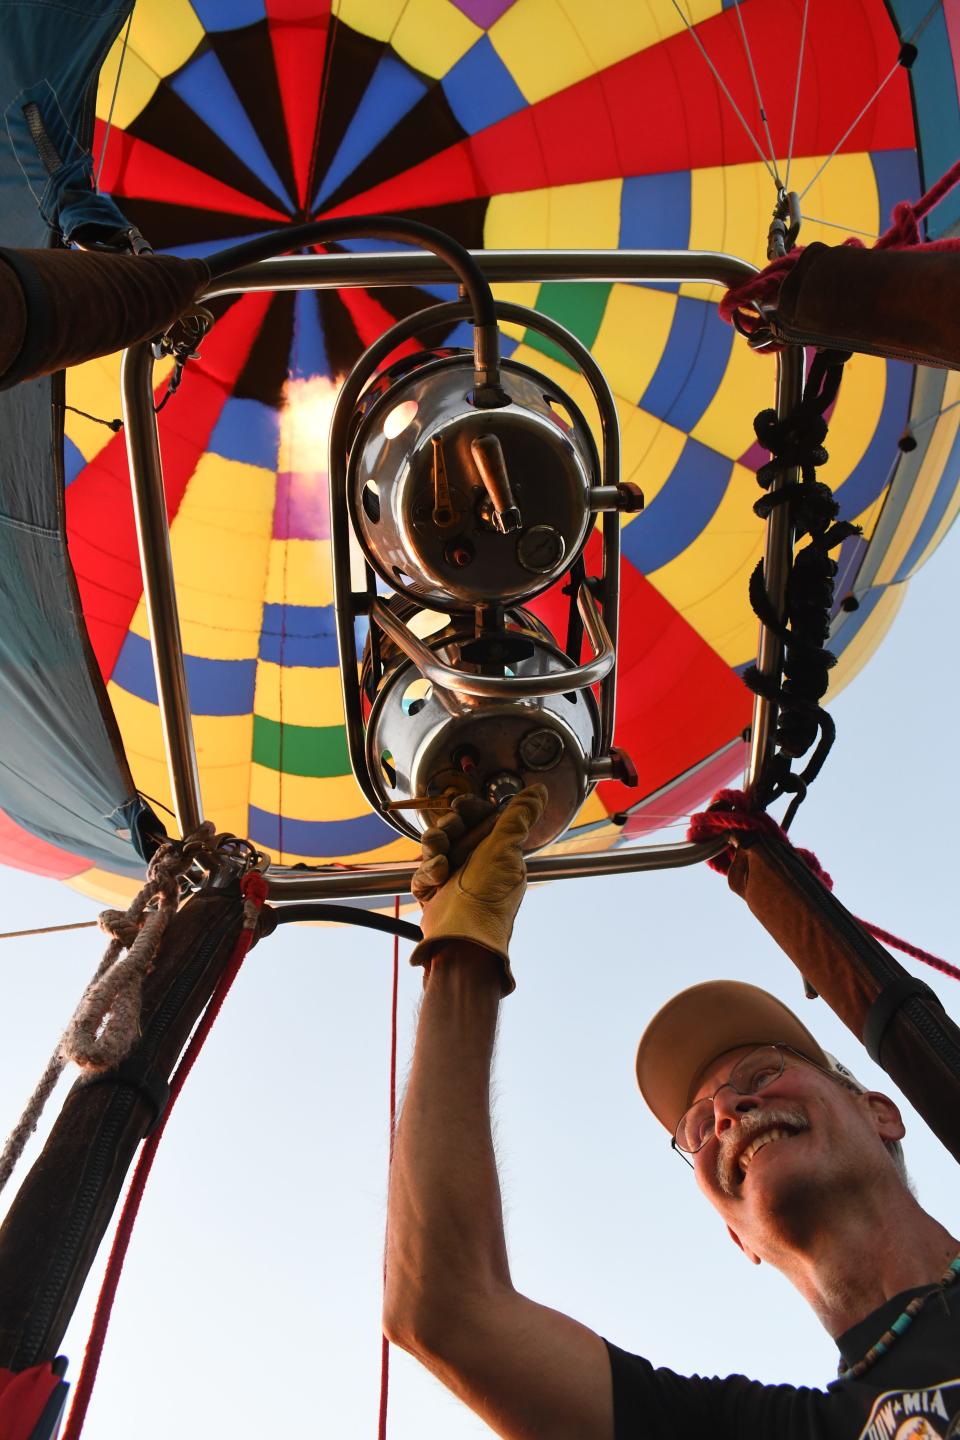 Hot air balloon pilot Bob Pulaski has a fear of heights. So he reasoned that if he learned to fly a balloon, he would get over it.